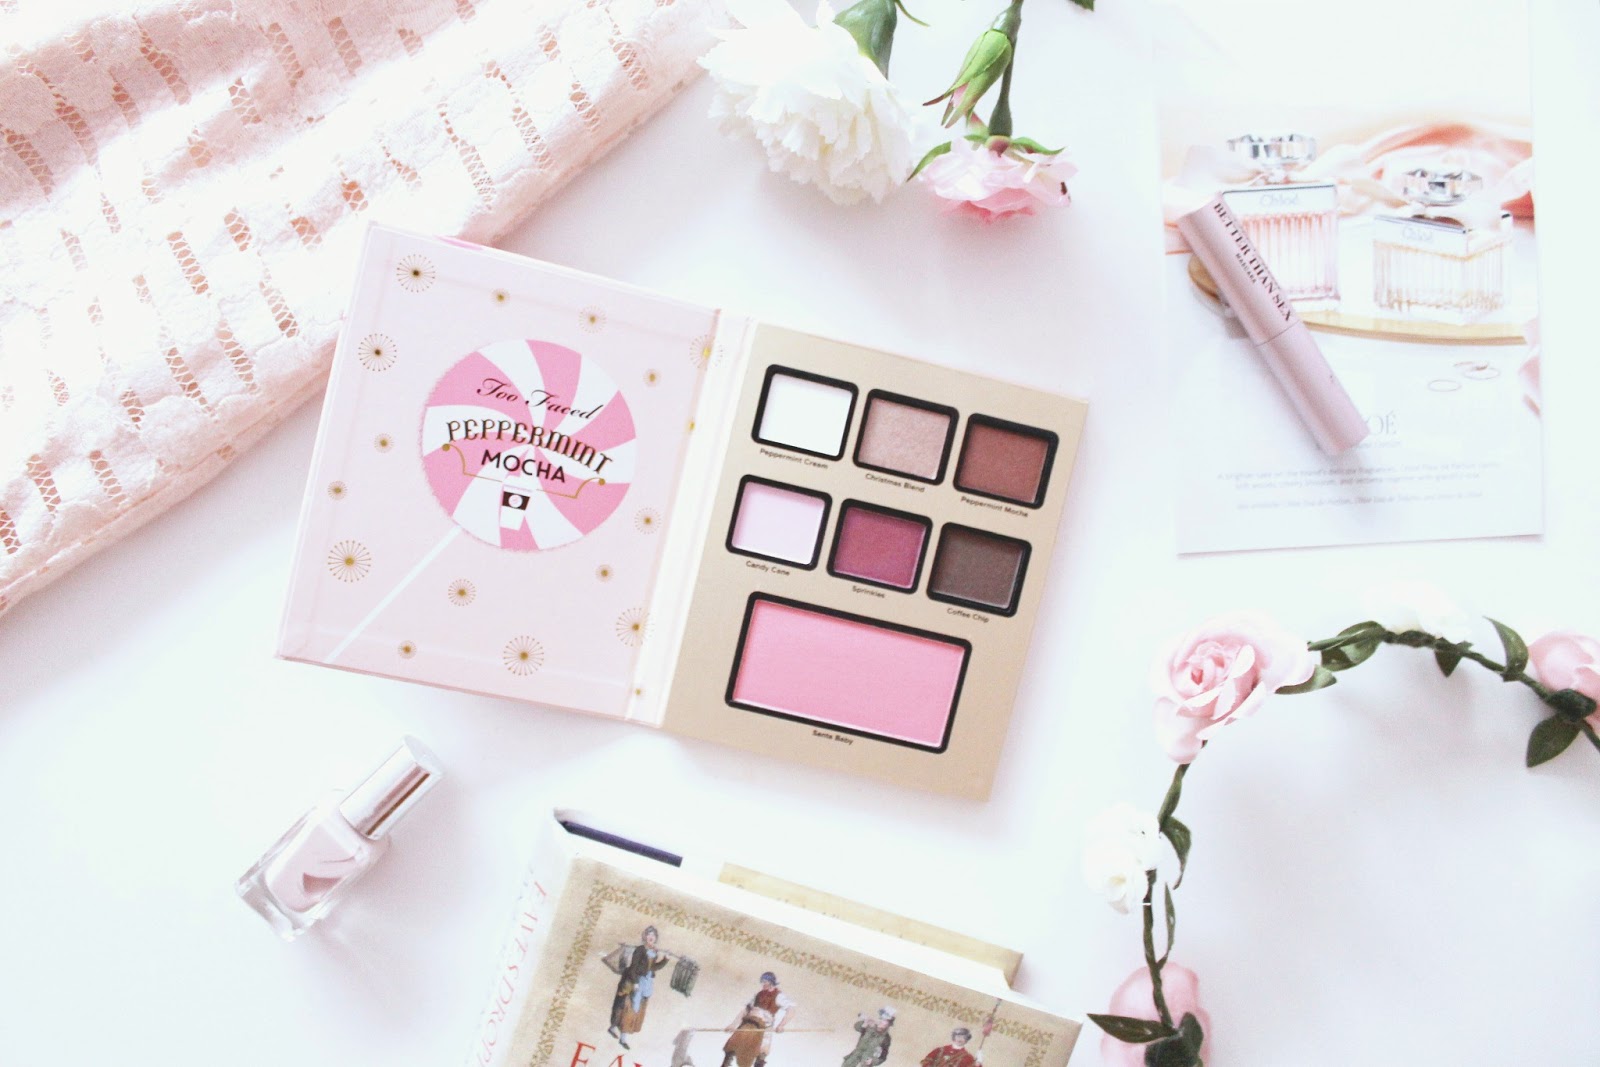 Too Faced Grande Hotel Cafe swatches and palettes review